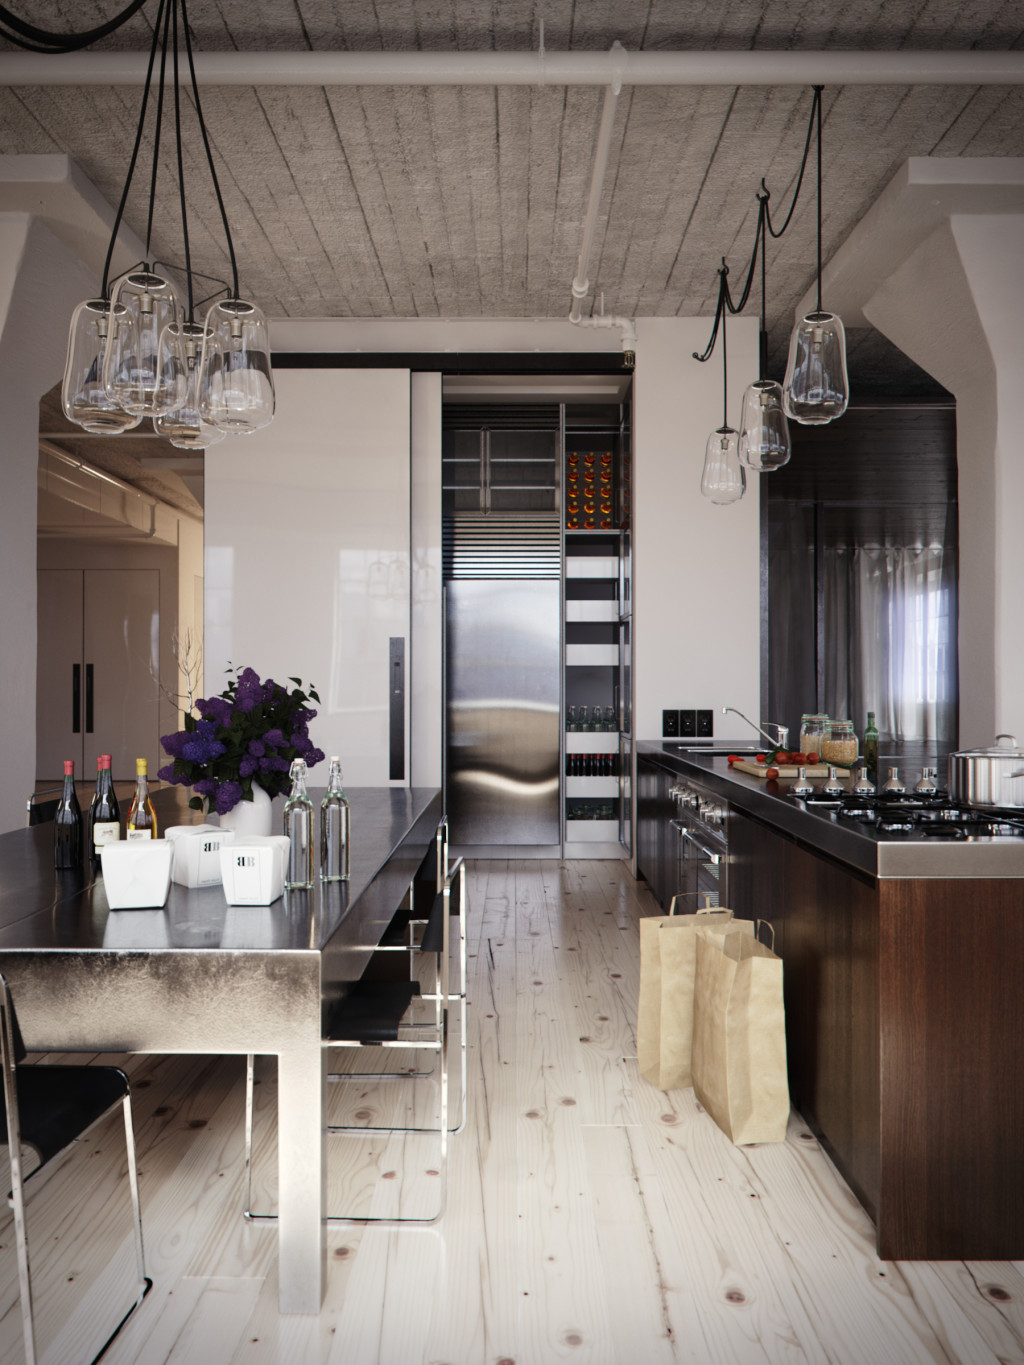 Industrial Kitchen Design: 10 Inspiring Ideas For A Chic And Modern Space